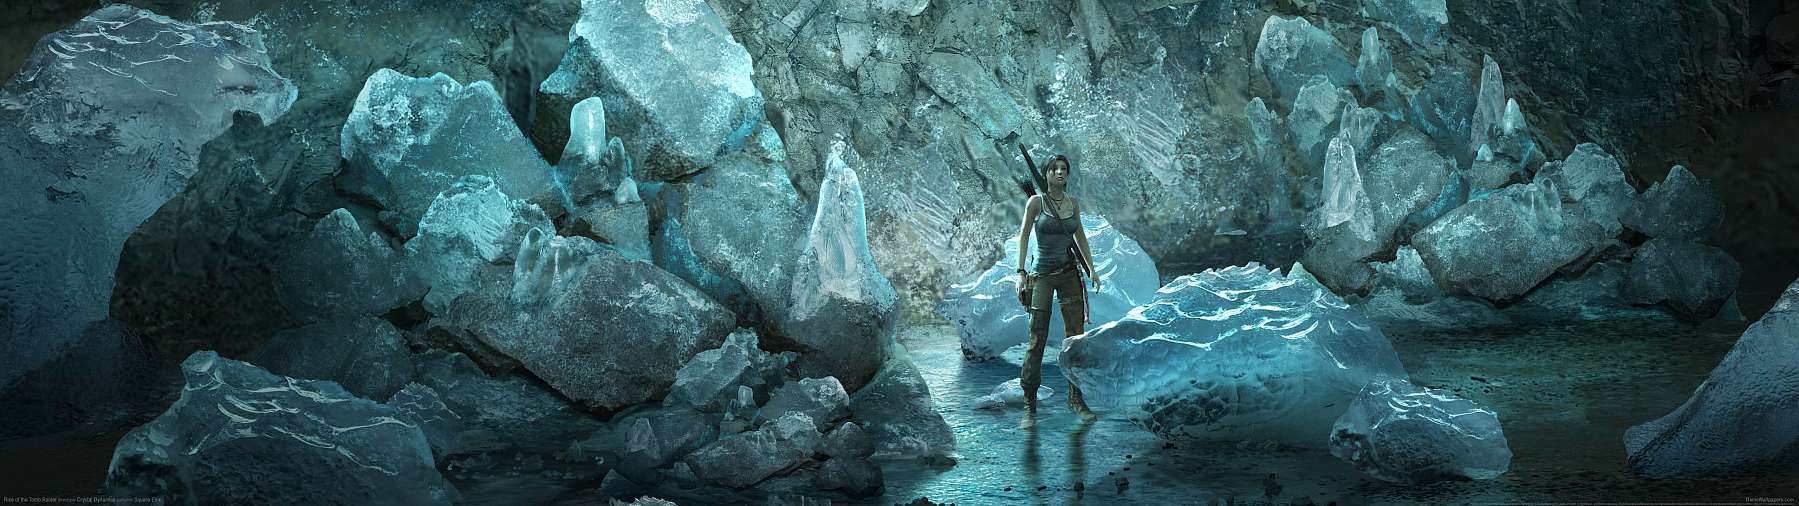 Rise of the Tomb Raider superwide fond d'cran 26